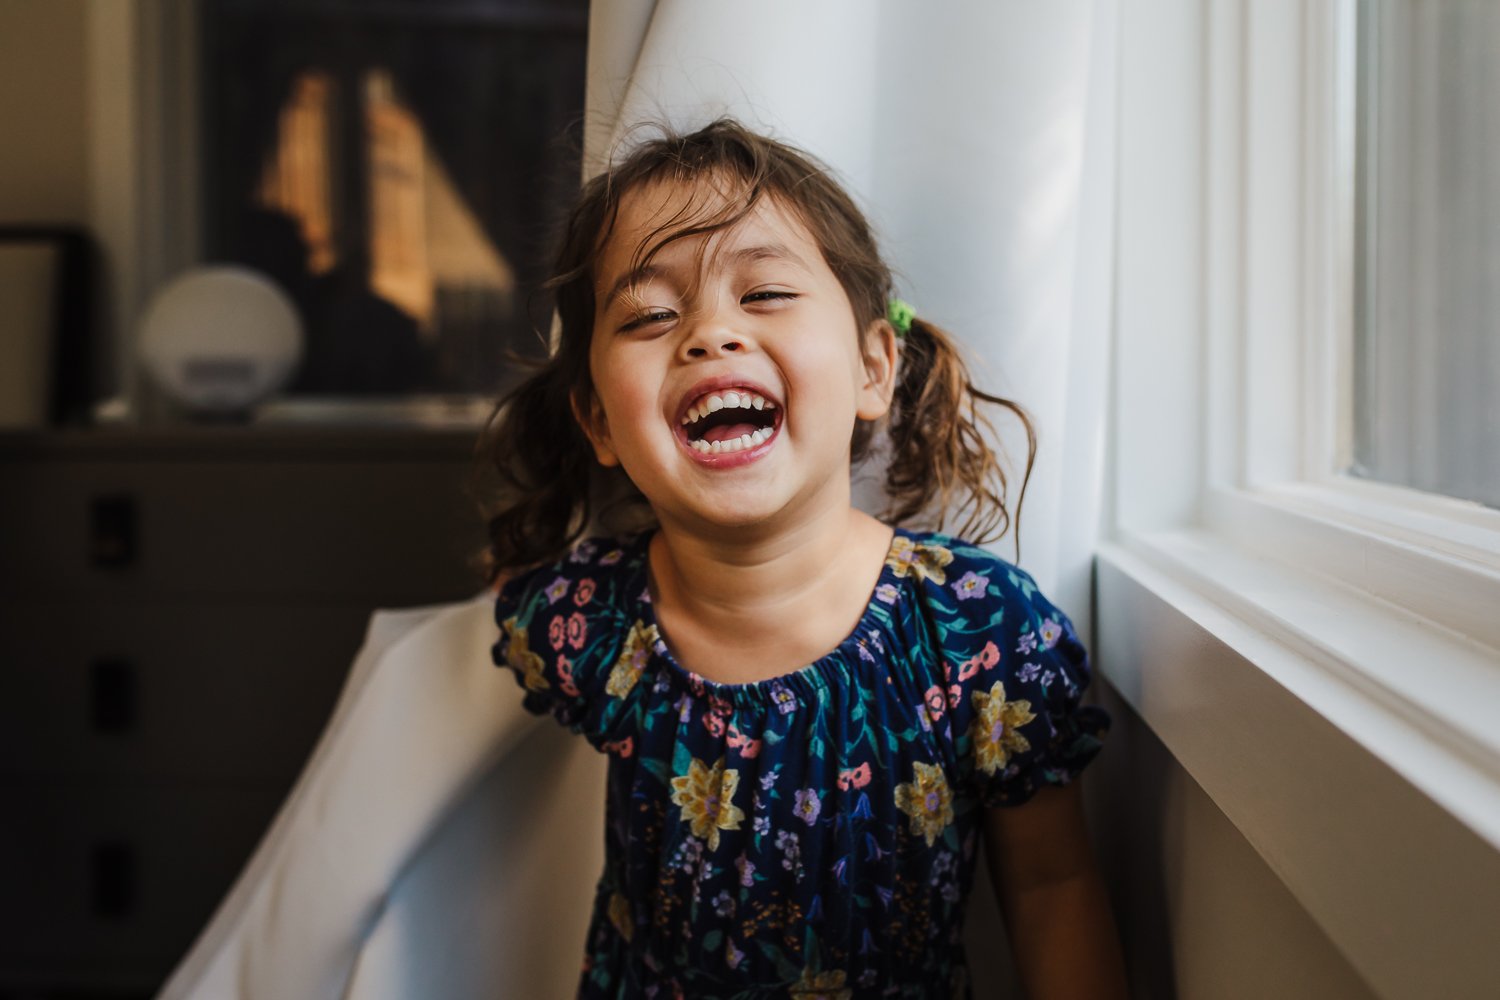 san-francisco-family-photographer-girl-laughing-by-window.jpg